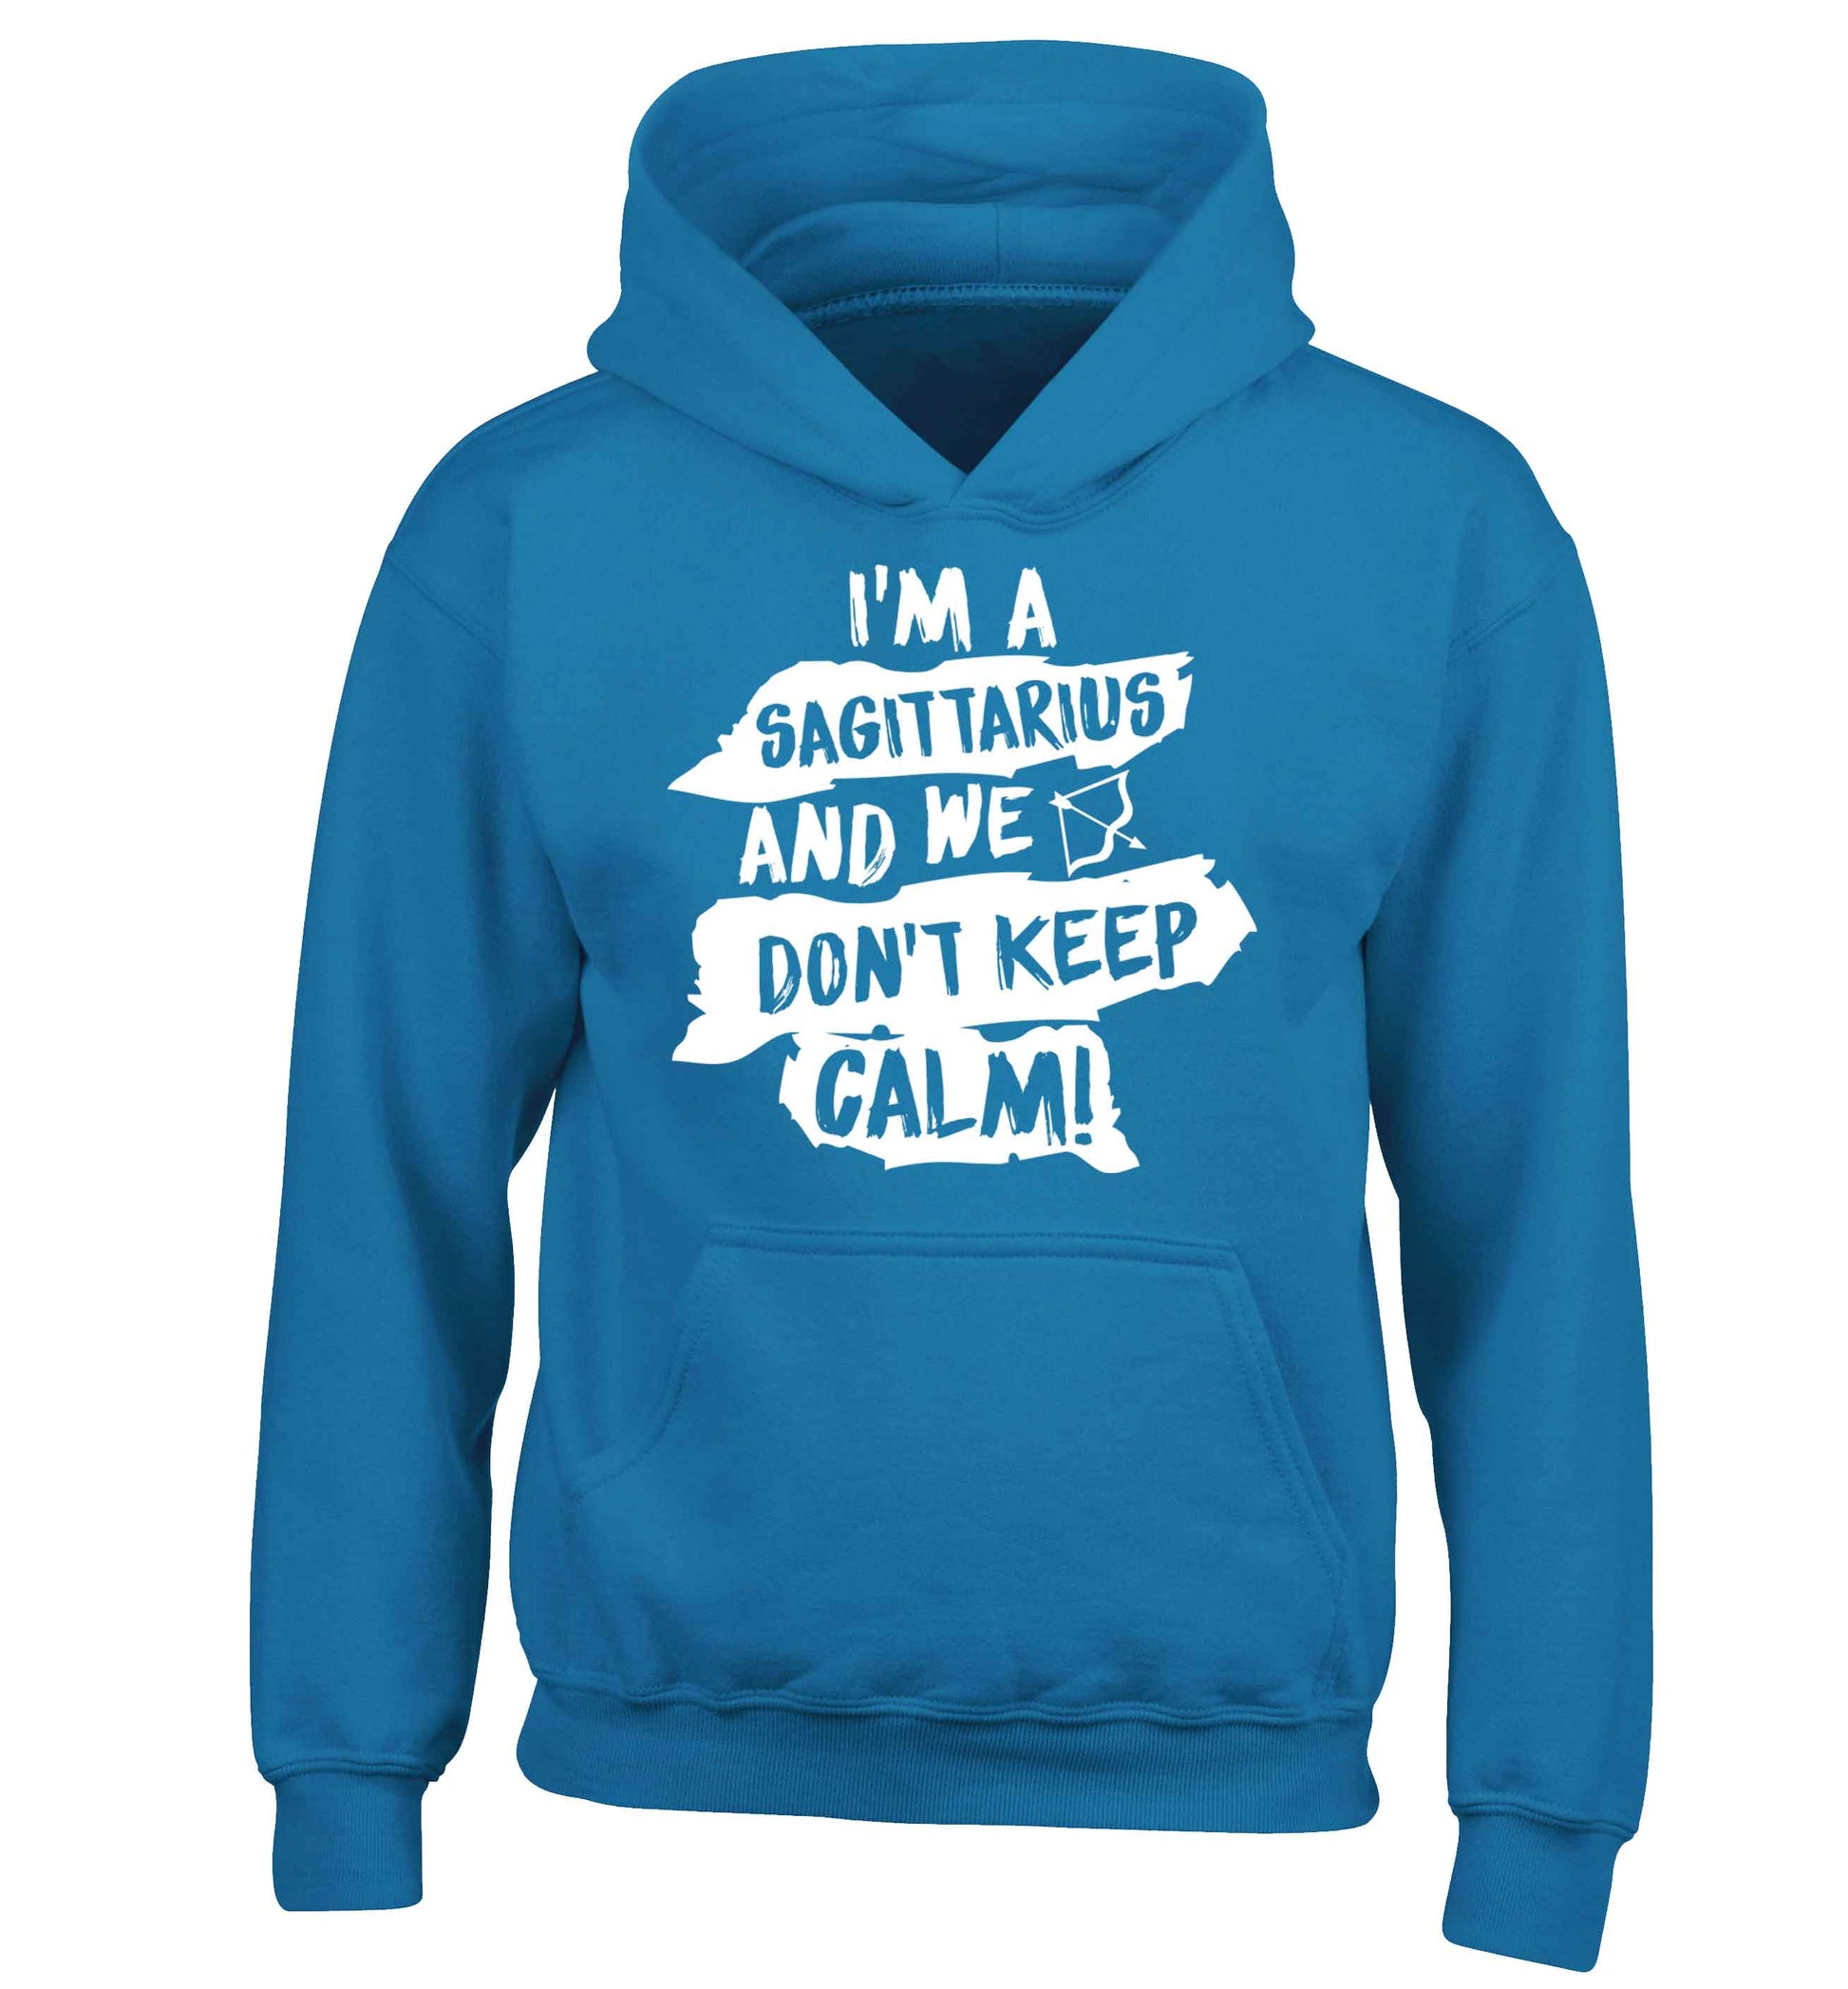 I'm a sagittarius and we don't keep calm children's blue hoodie 12-13 Years